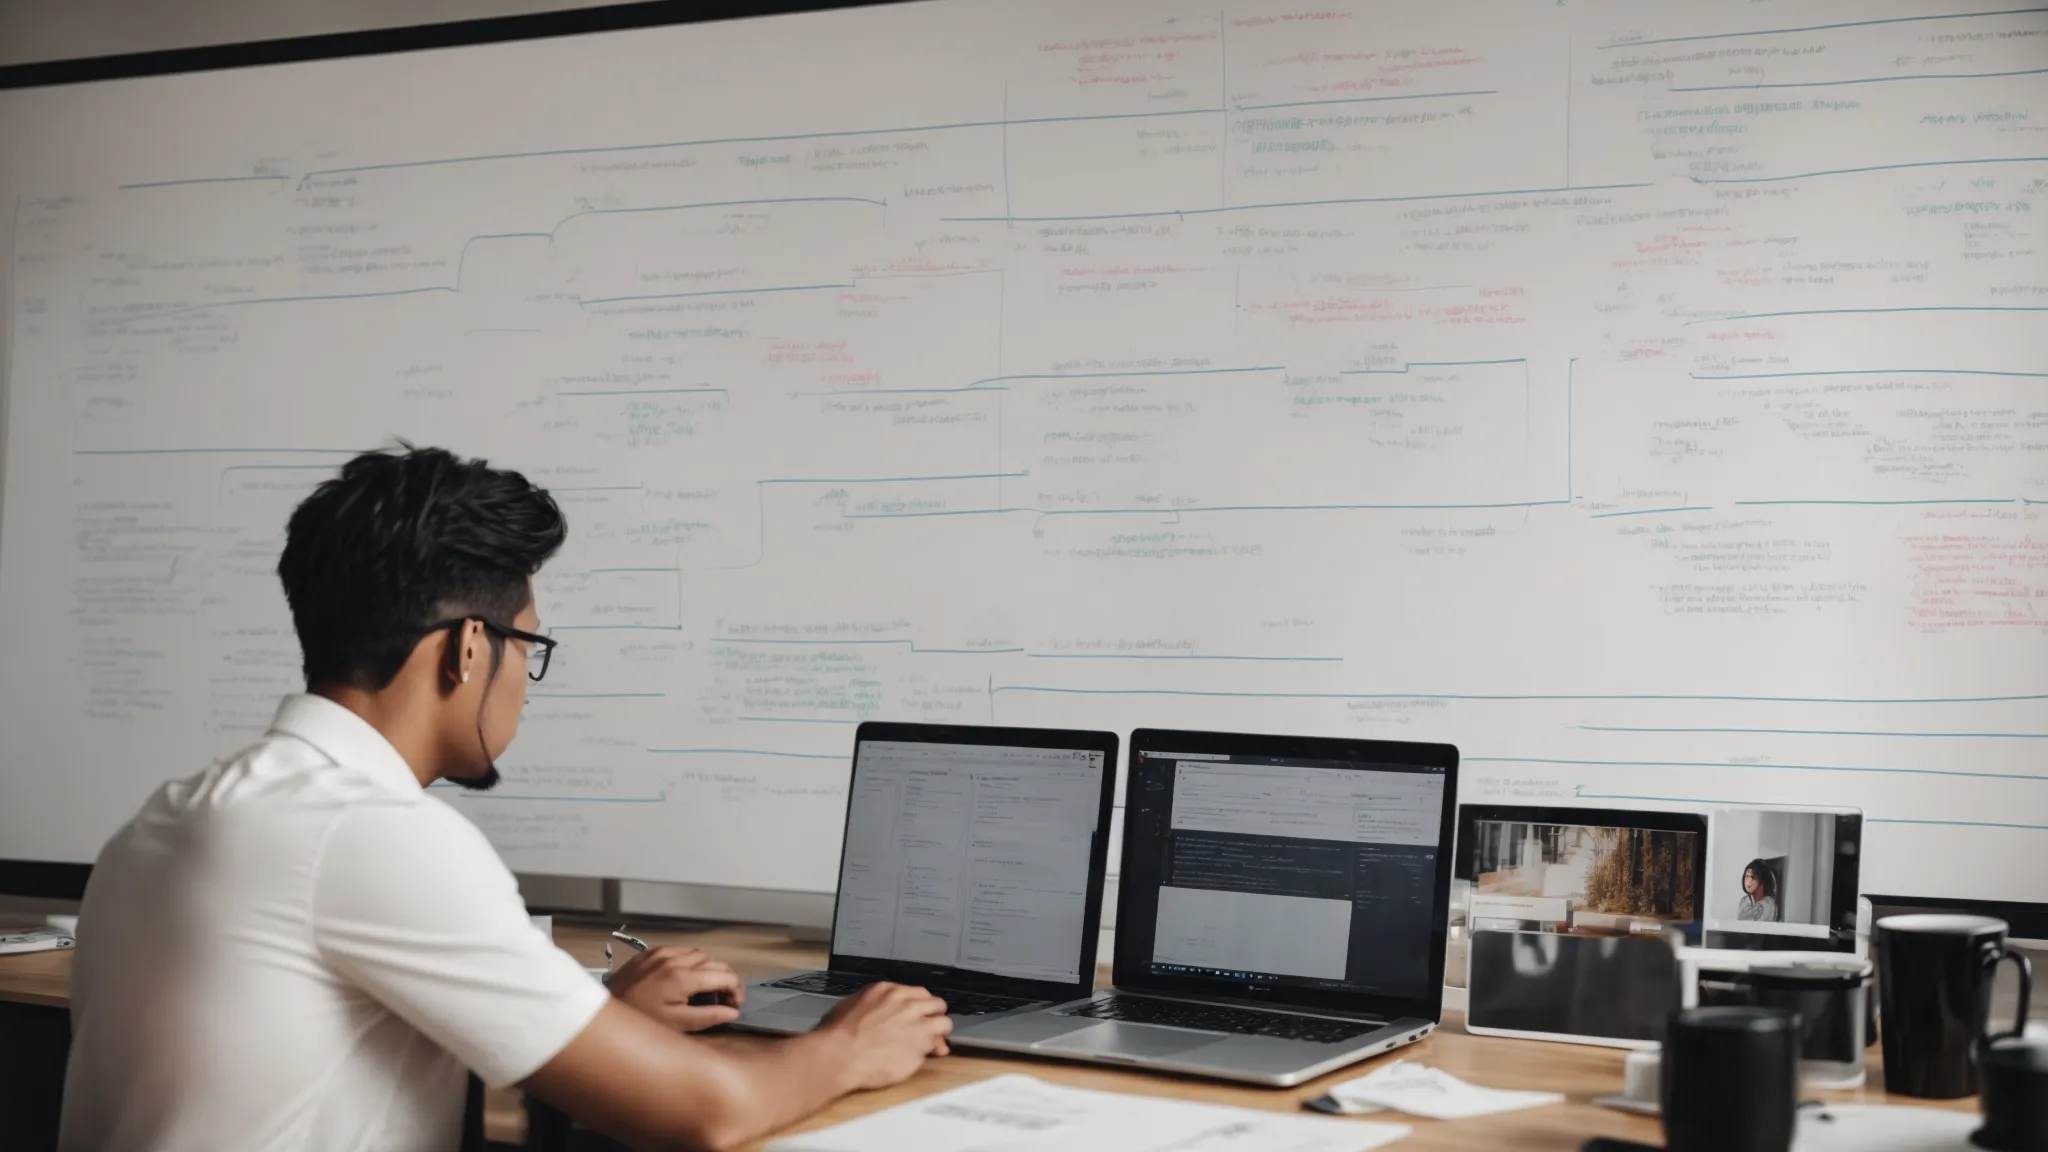 a person using a laptop at a desk with a whiteboard covered in seo strategy flowcharts.